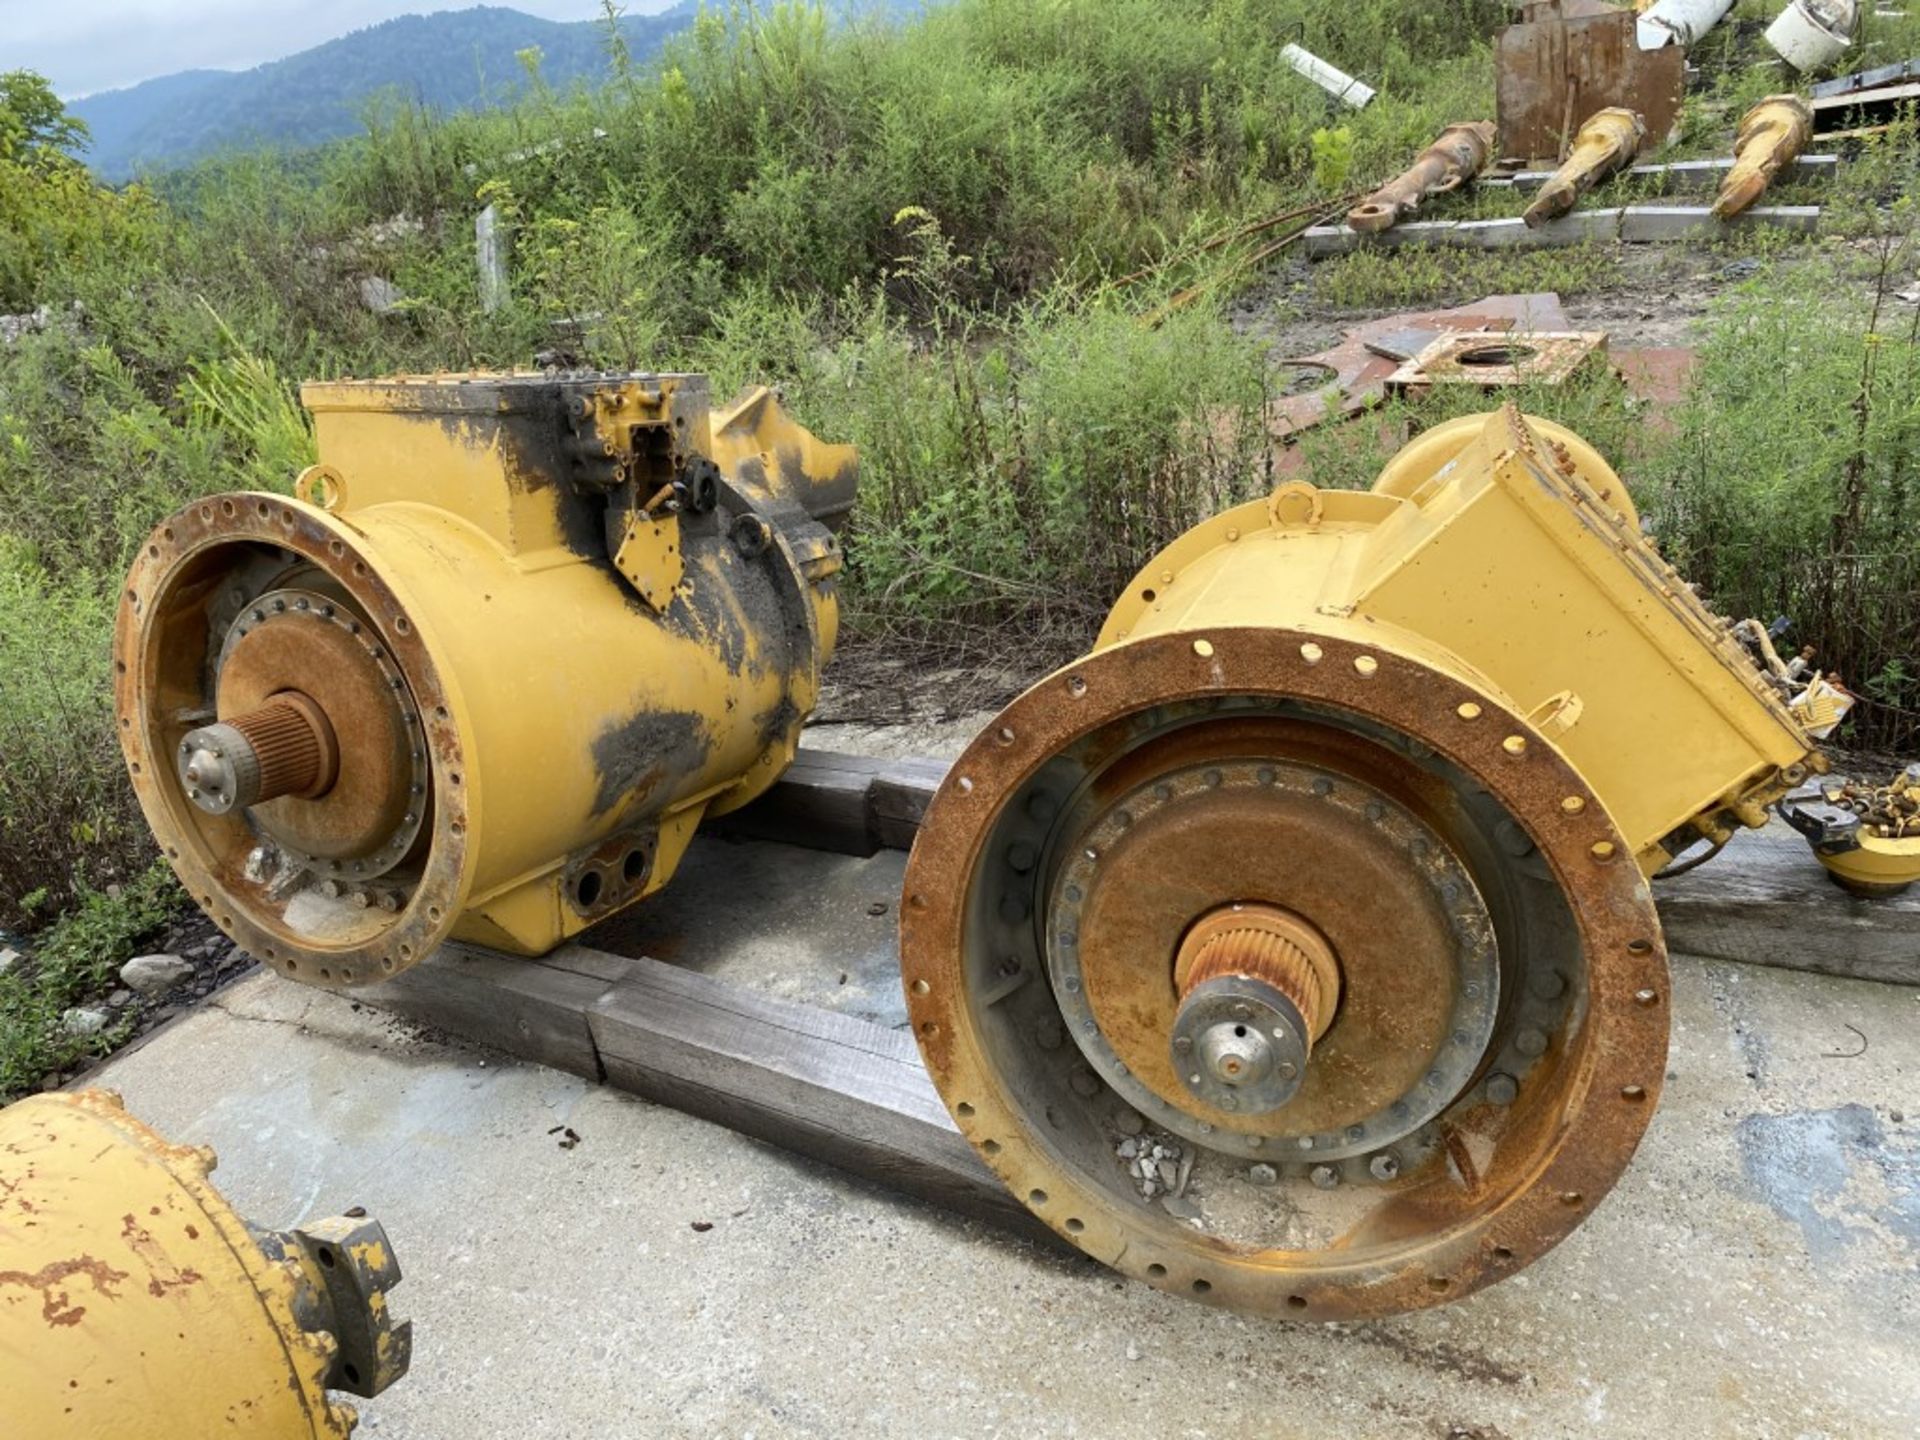 CATERPILLAR DOZER BLADE, 241.8'', S/N: 7GW00986, COMES WITH ASSORTED USED EQUIPMENT PARTS - Image 9 of 19